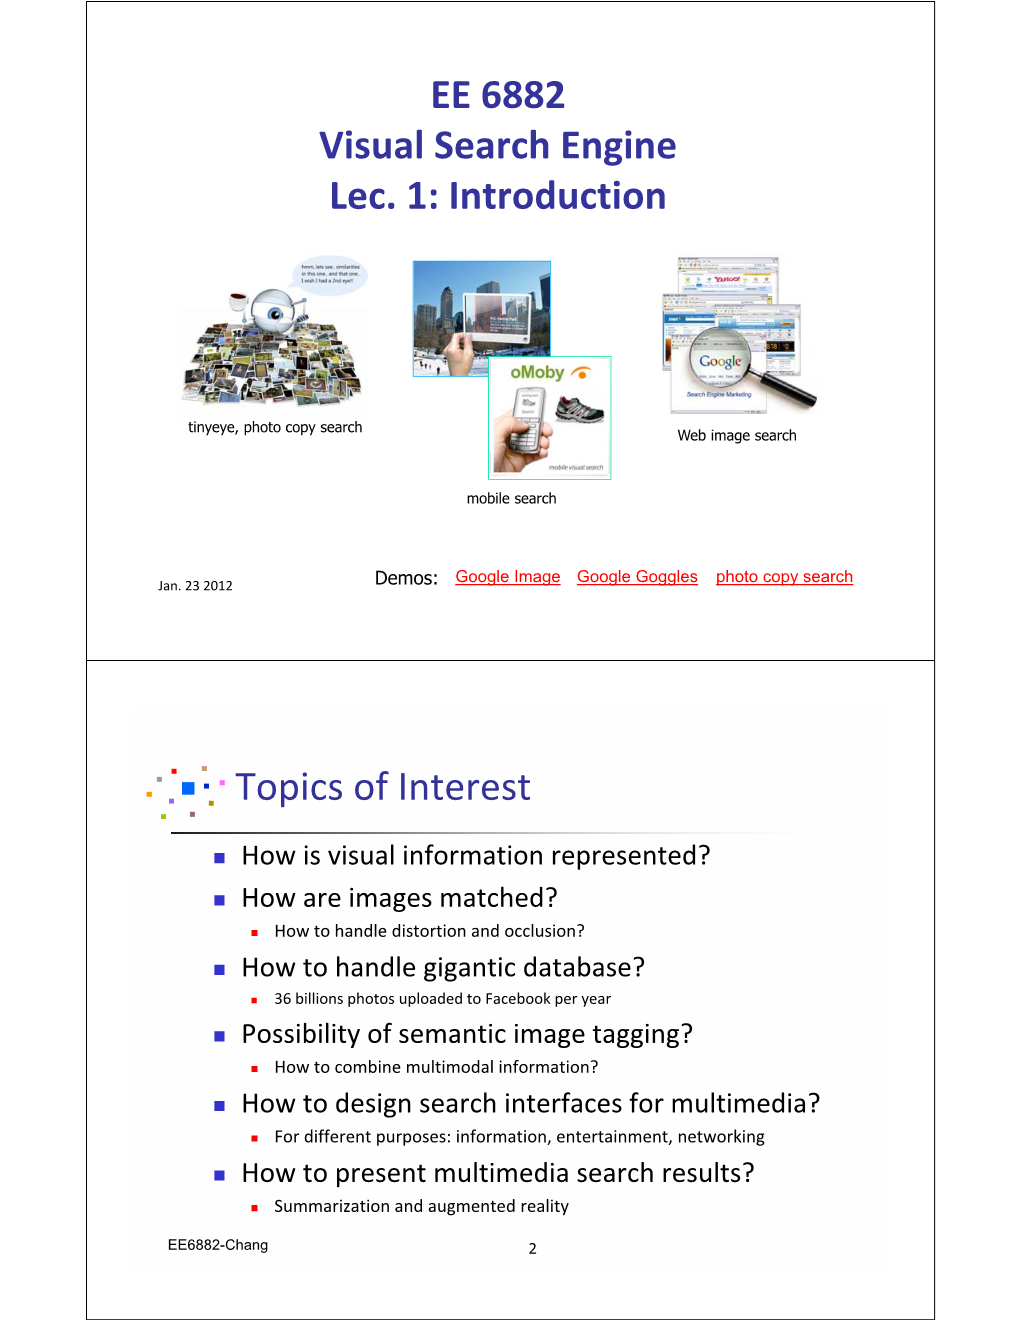 EE 6882 Visual Search Engine Lec. 1: Introduction Topics of Interest